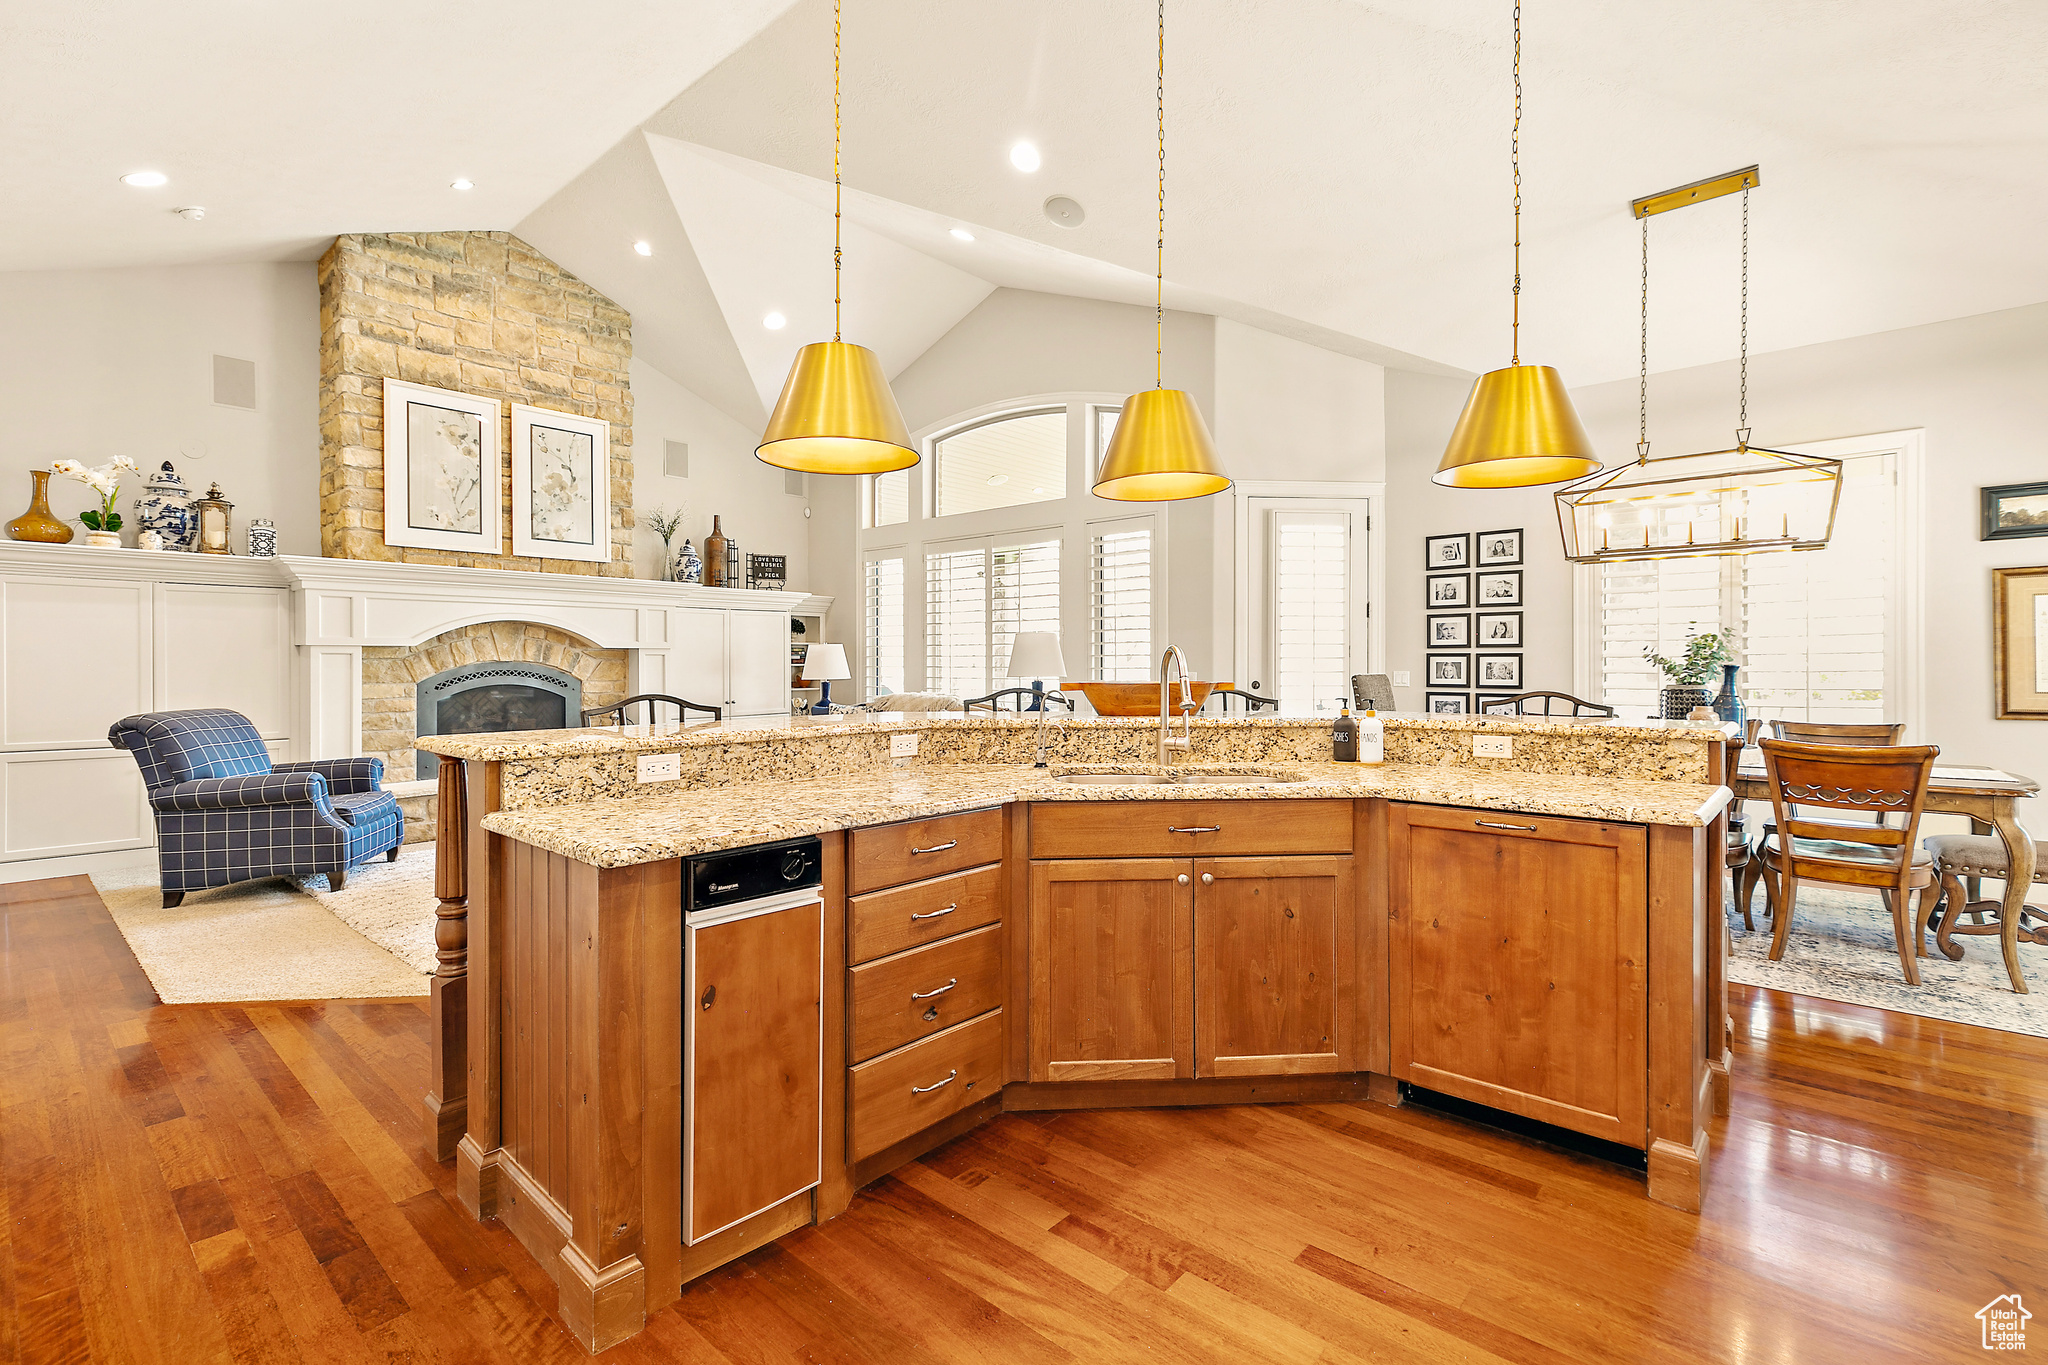 Kitchen featuring a stone fireplace, hanging light fixtures, a kitchen island with sink, light stone counters, and hardwood / wood-style floors